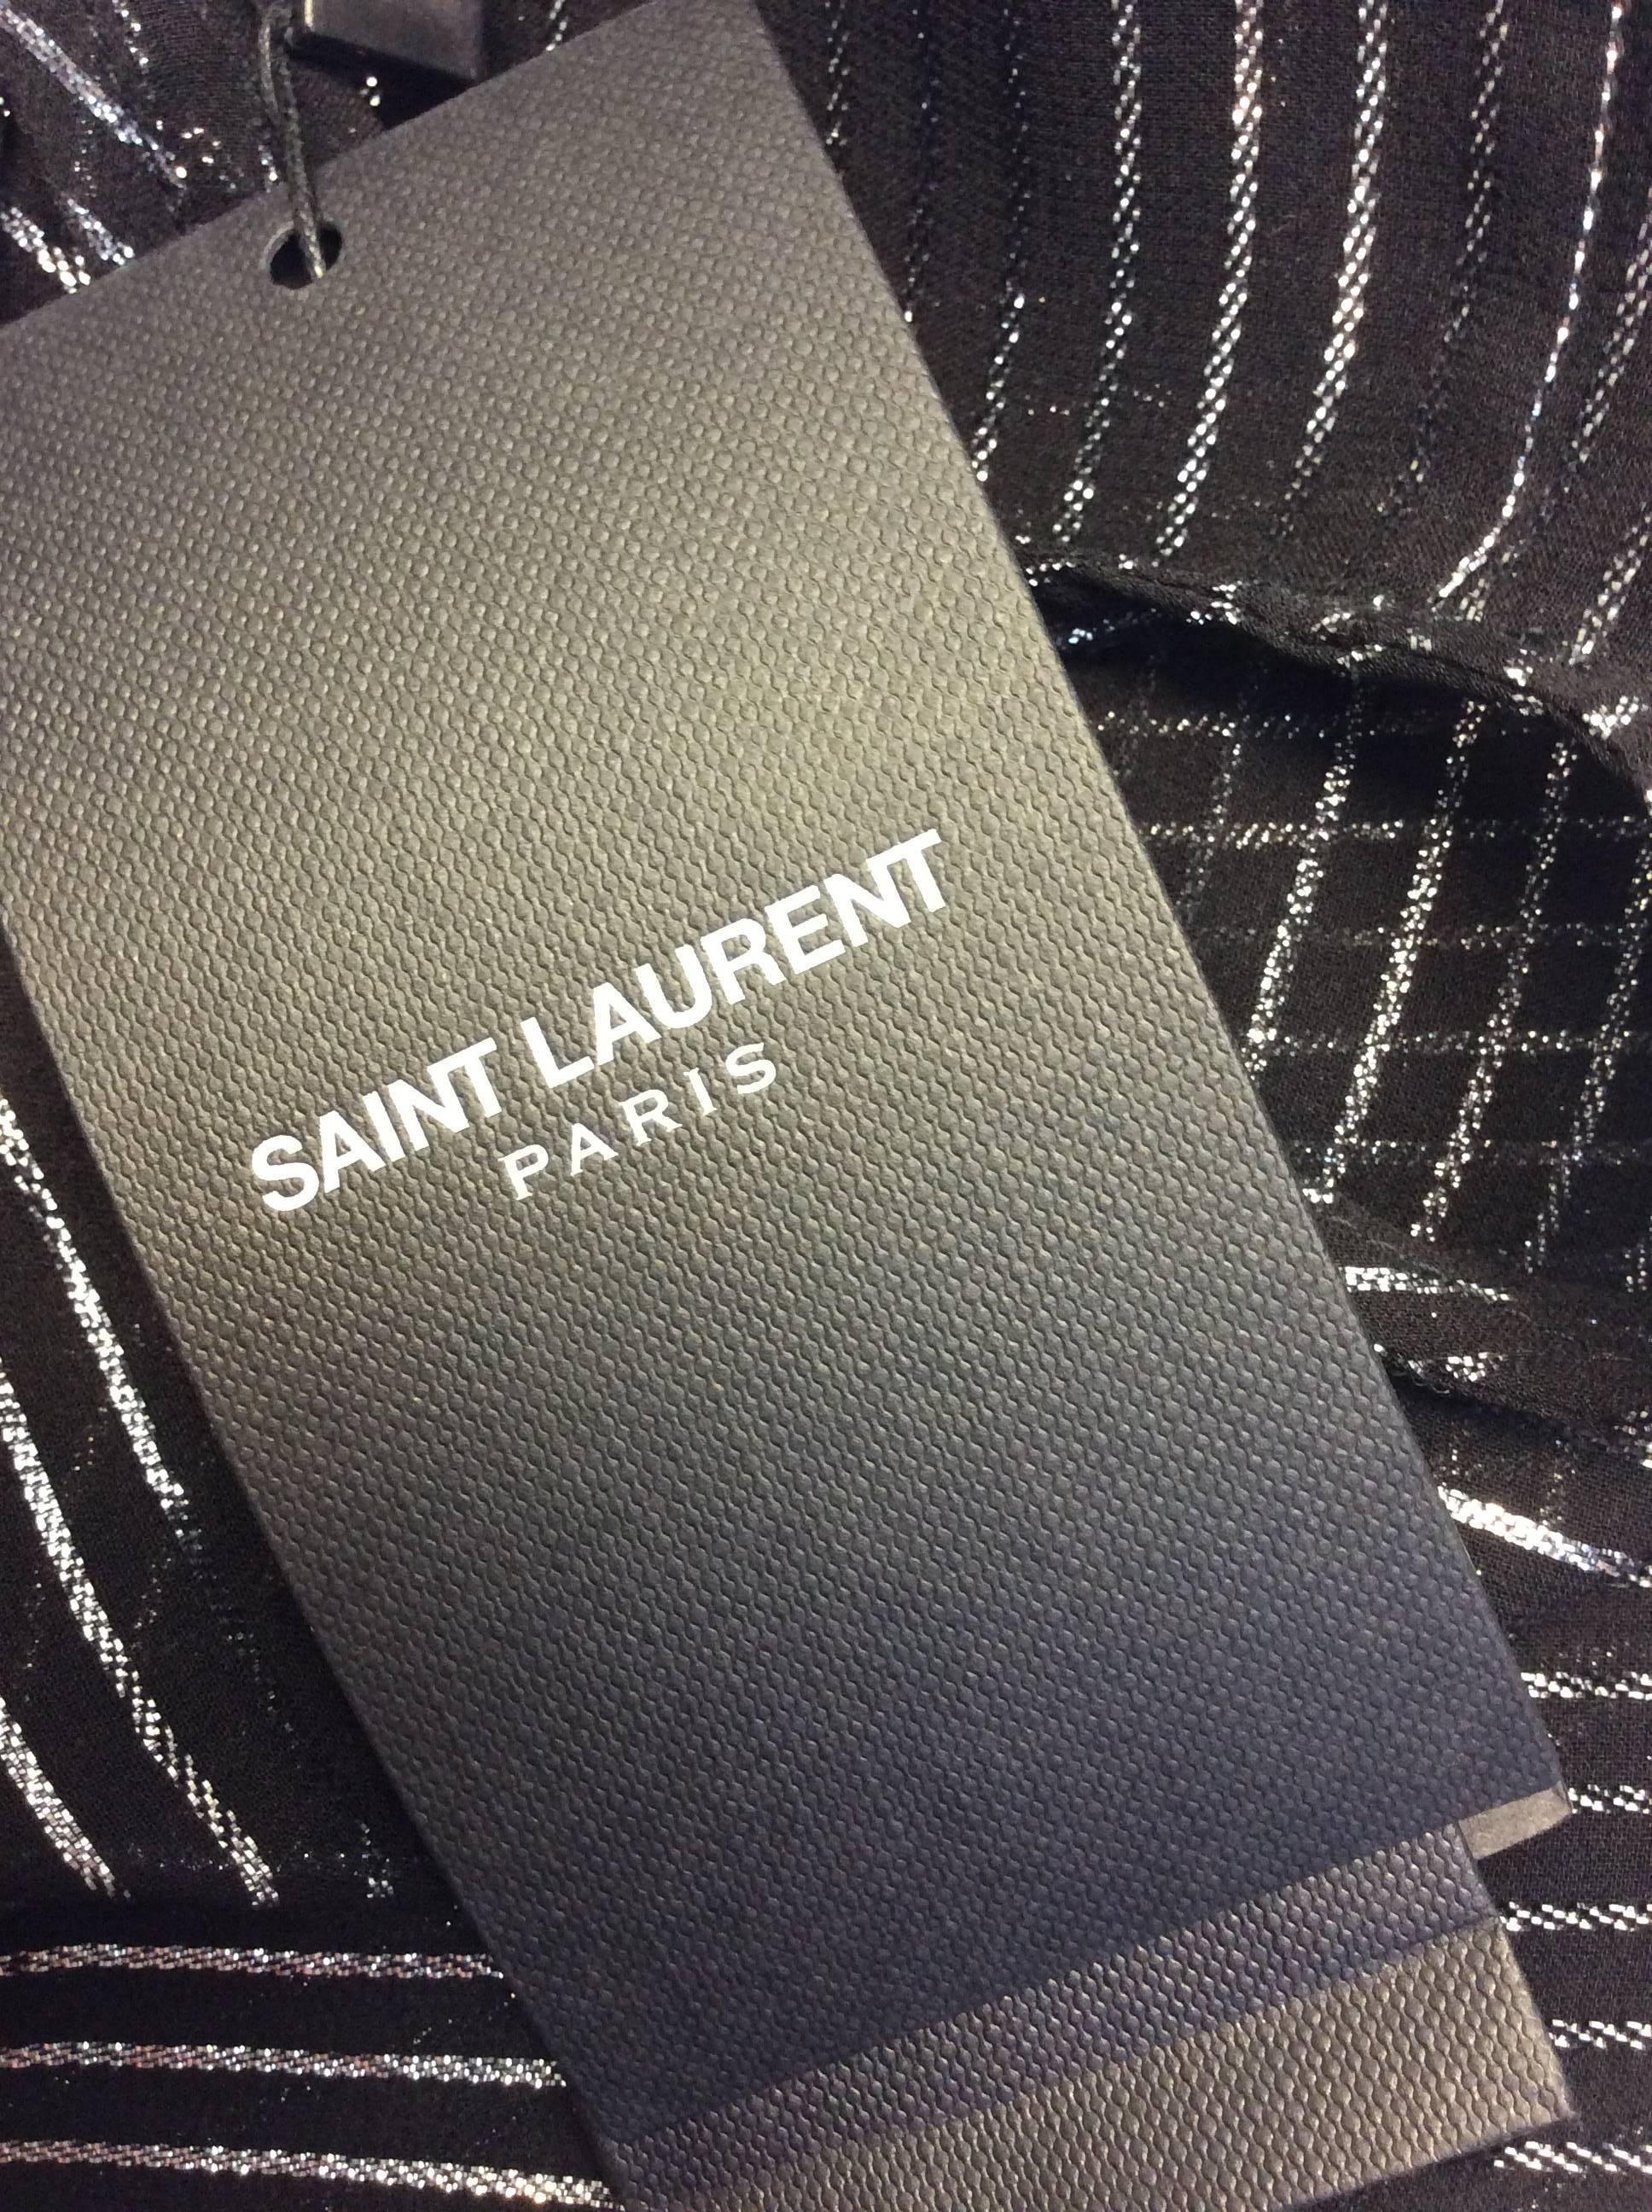 Saint Laurent Black and Silver Silk Blouse NWT For Sale 3